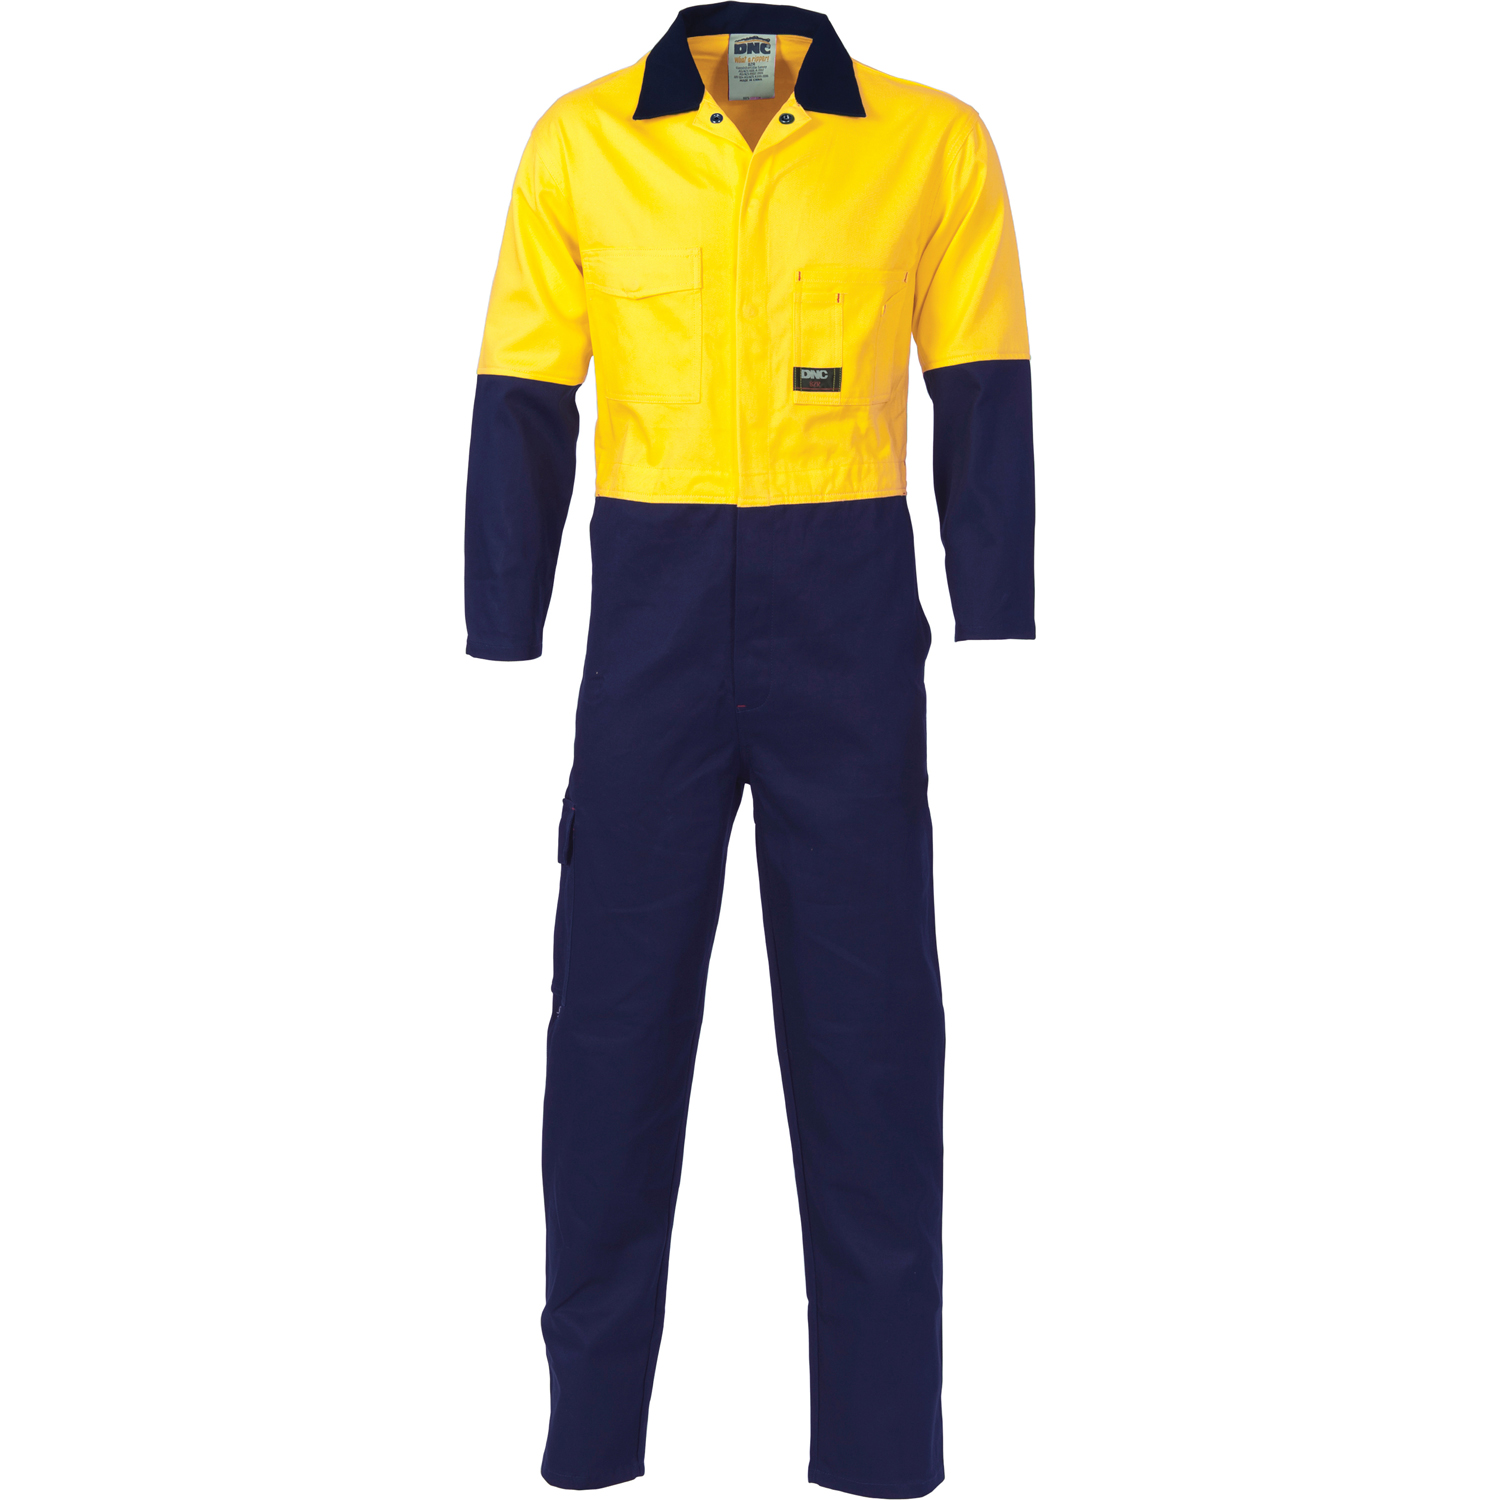 DNC 3852-190gsm HiVis Cool-Breeze Two Tone Light Weight Cotton C